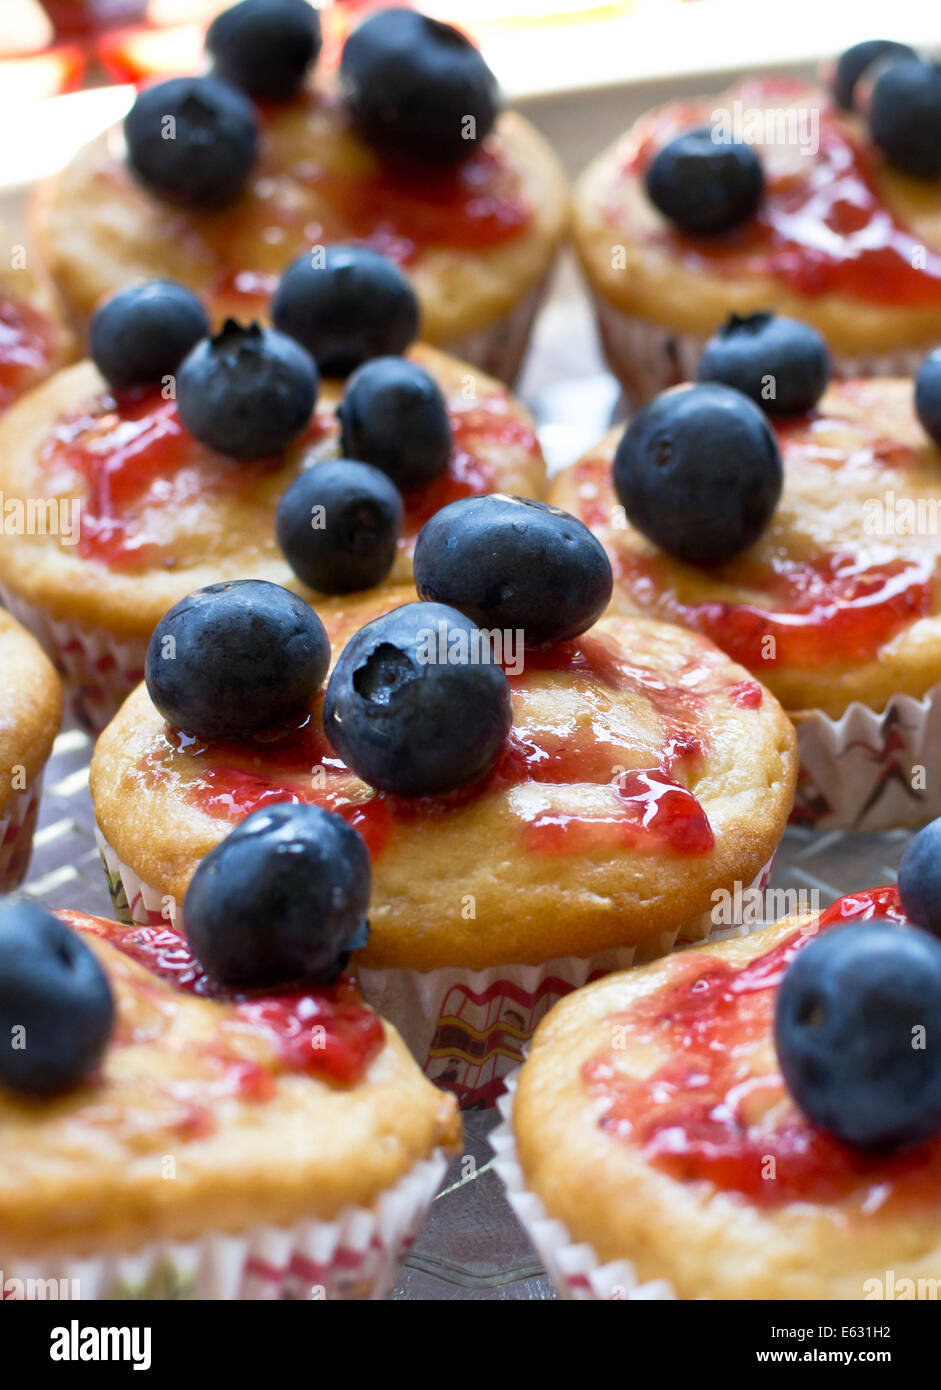 Closeup of low fat vanilla cupcakes with strawberry jam and fresh blueberries for a topping. Stock Photo